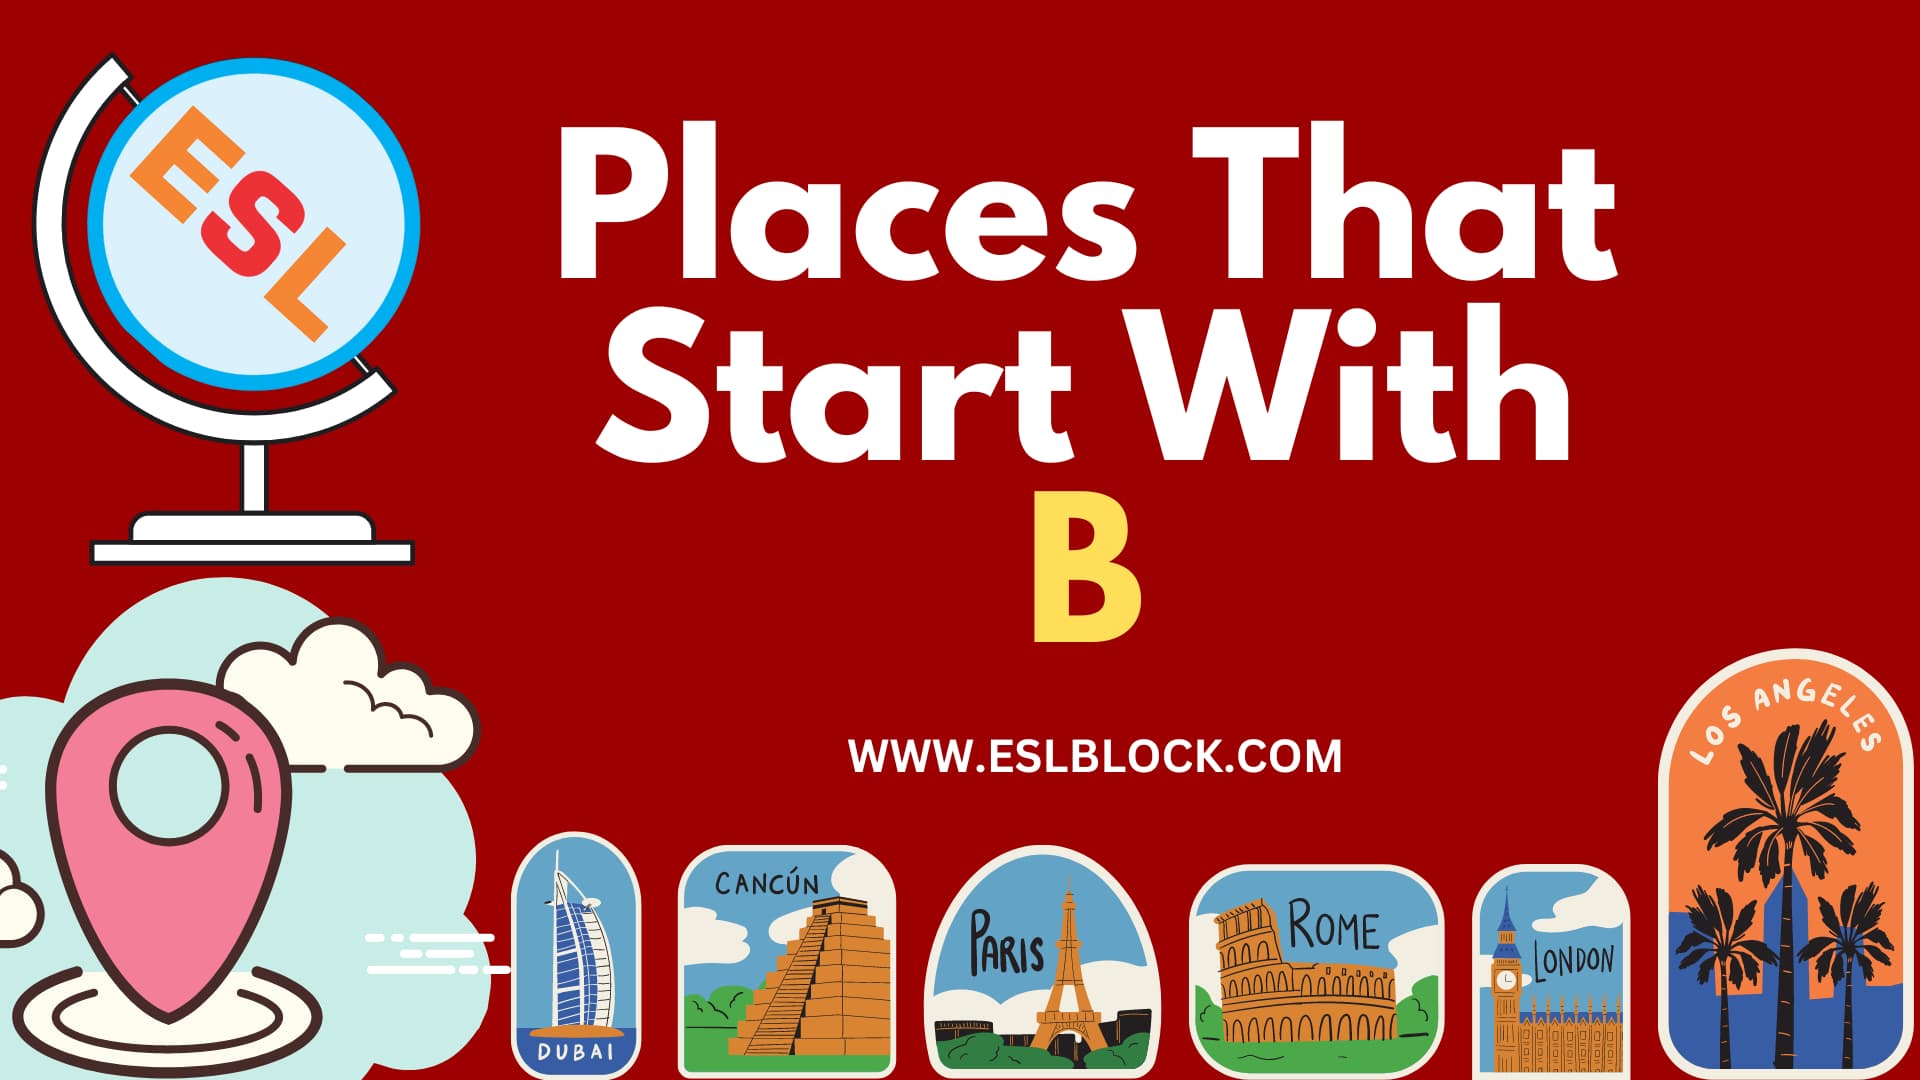 4 Letter Places, 5 Letter Places Starting With B, B Places, B Places in English, B Places Names, English, English Grammar, English Vocabulary, English Words, List of Places That Start With B, Places List, Places Names, Places That Start With B, Vocabulary, Words That Start With B